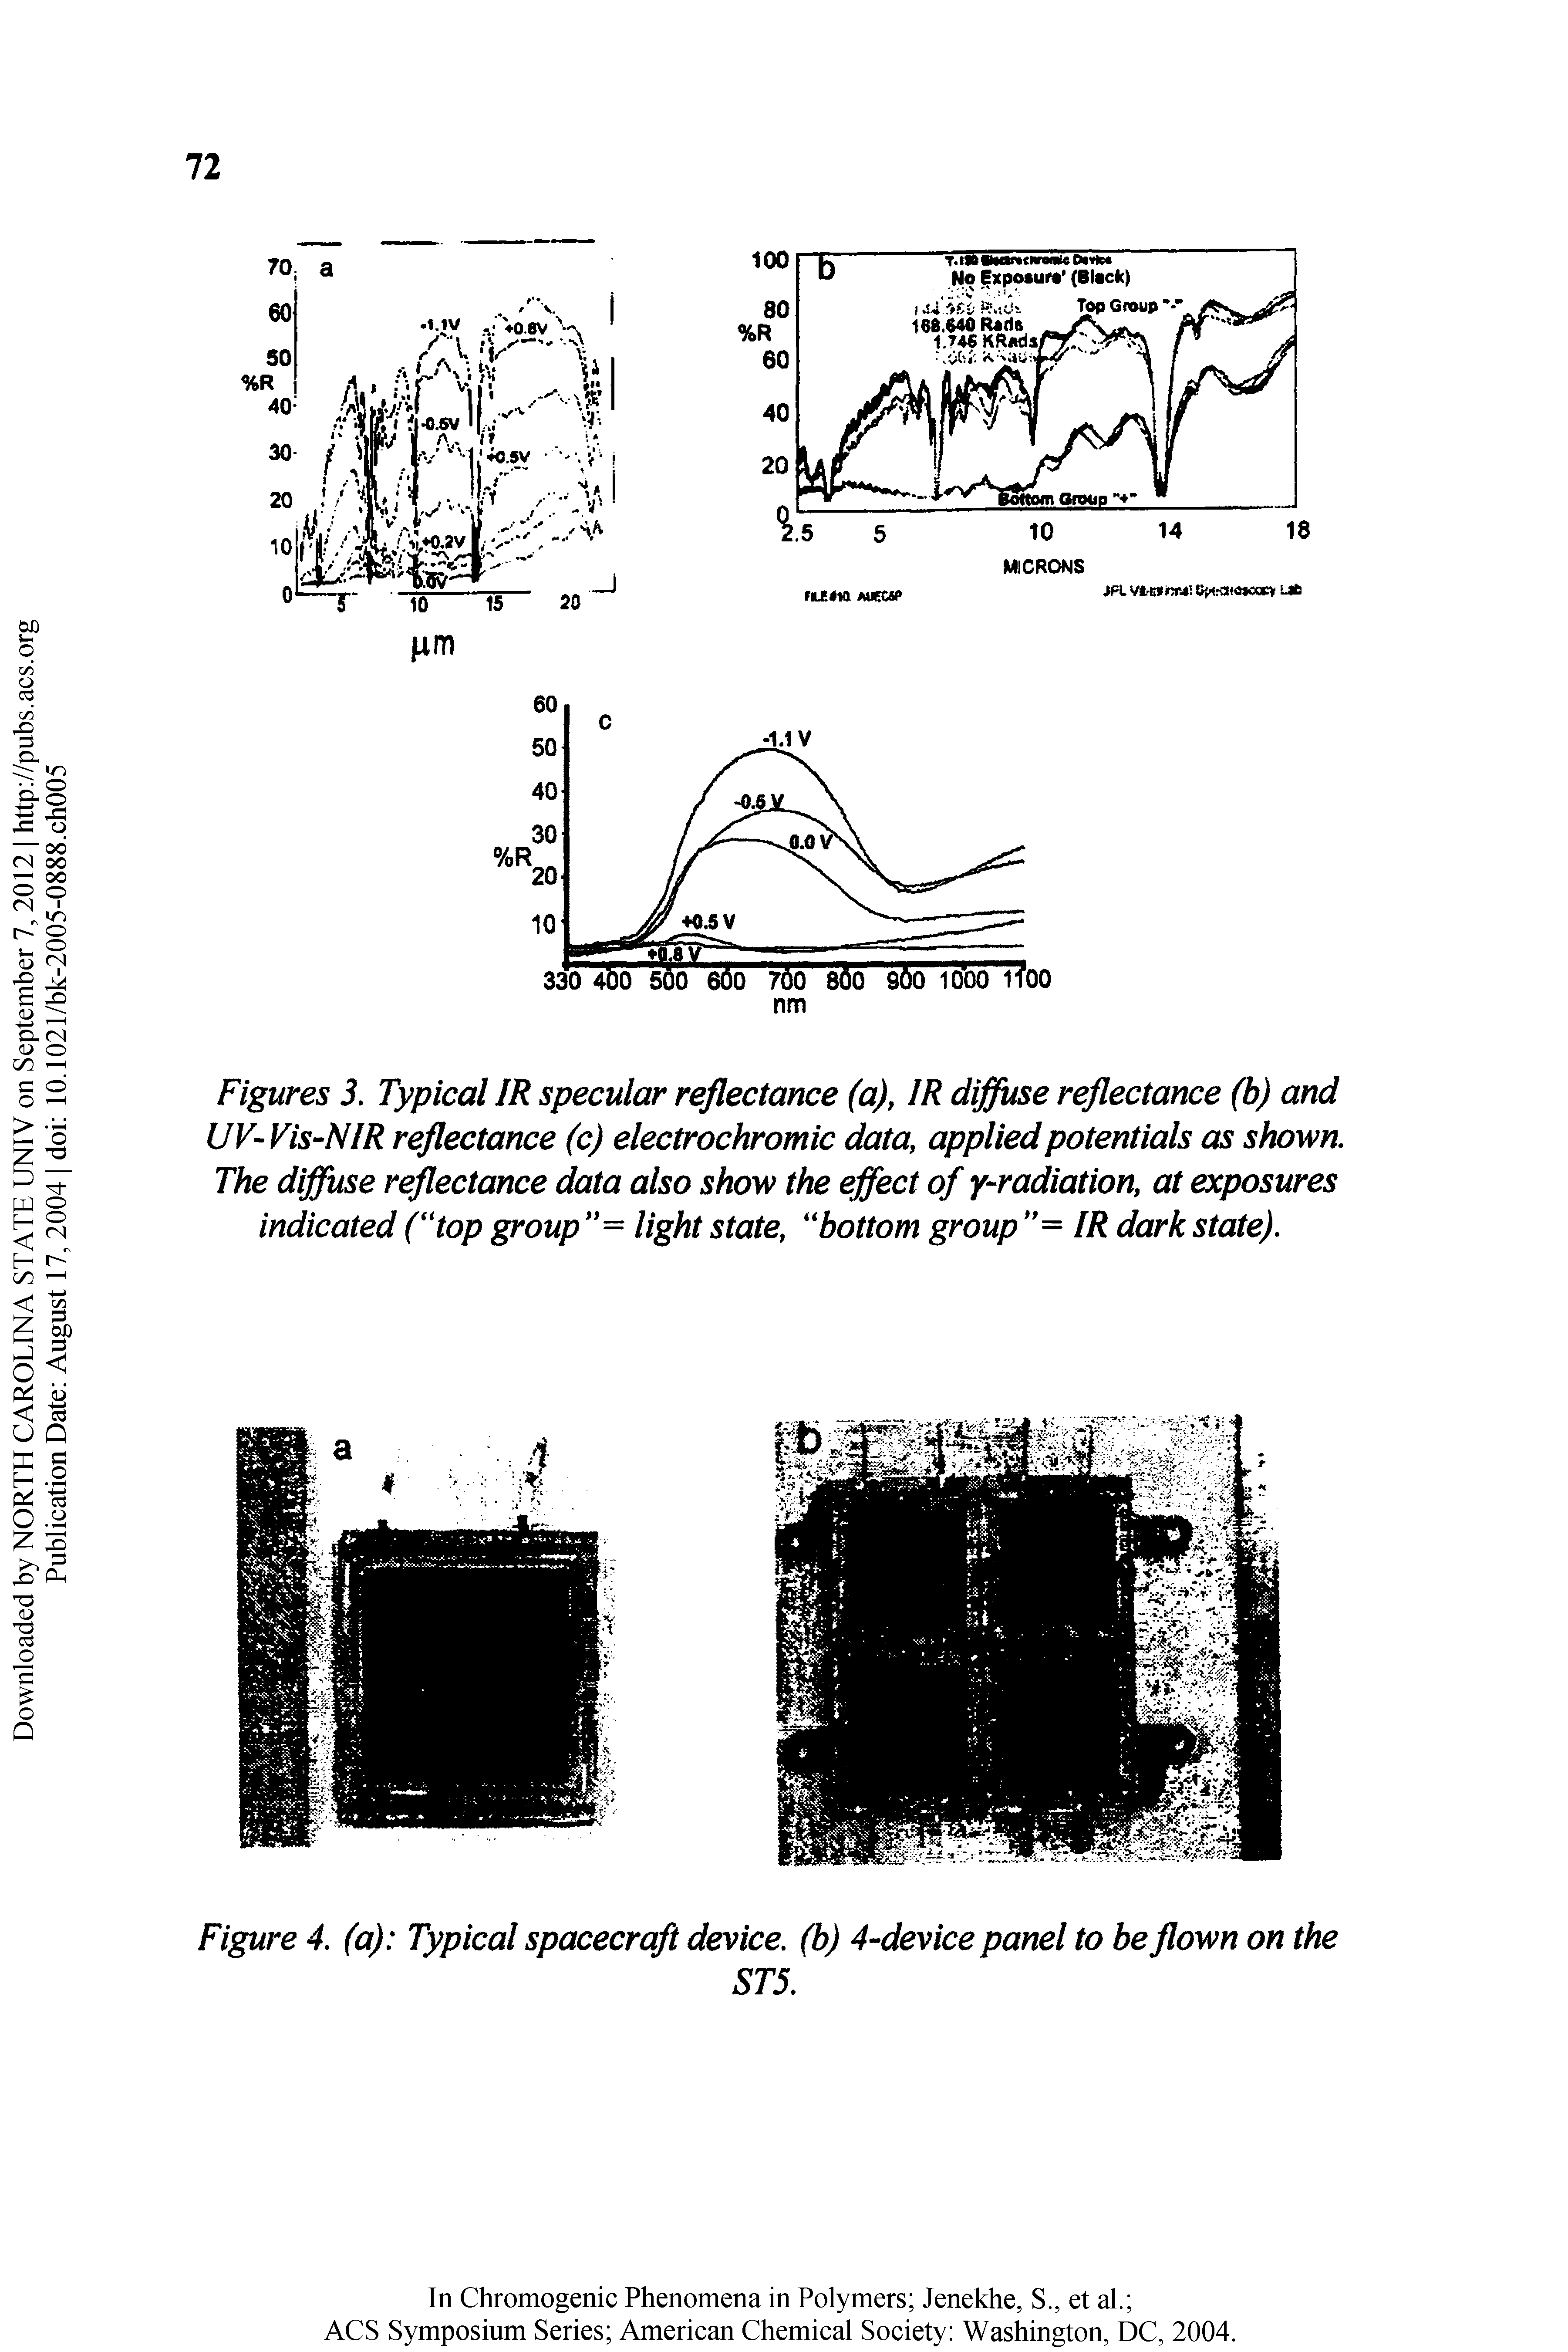 Figures 3. Typical IR specular reflectance (a), IR diffuse reflectance (b) and UV-Vis-NIR reflectance (c) electrochromic data, applied potentials as shown. The diffuse reflectance data also show the effect of y-radiation, at exposures indicated ( top group = light state, bottom group = IR dark state).